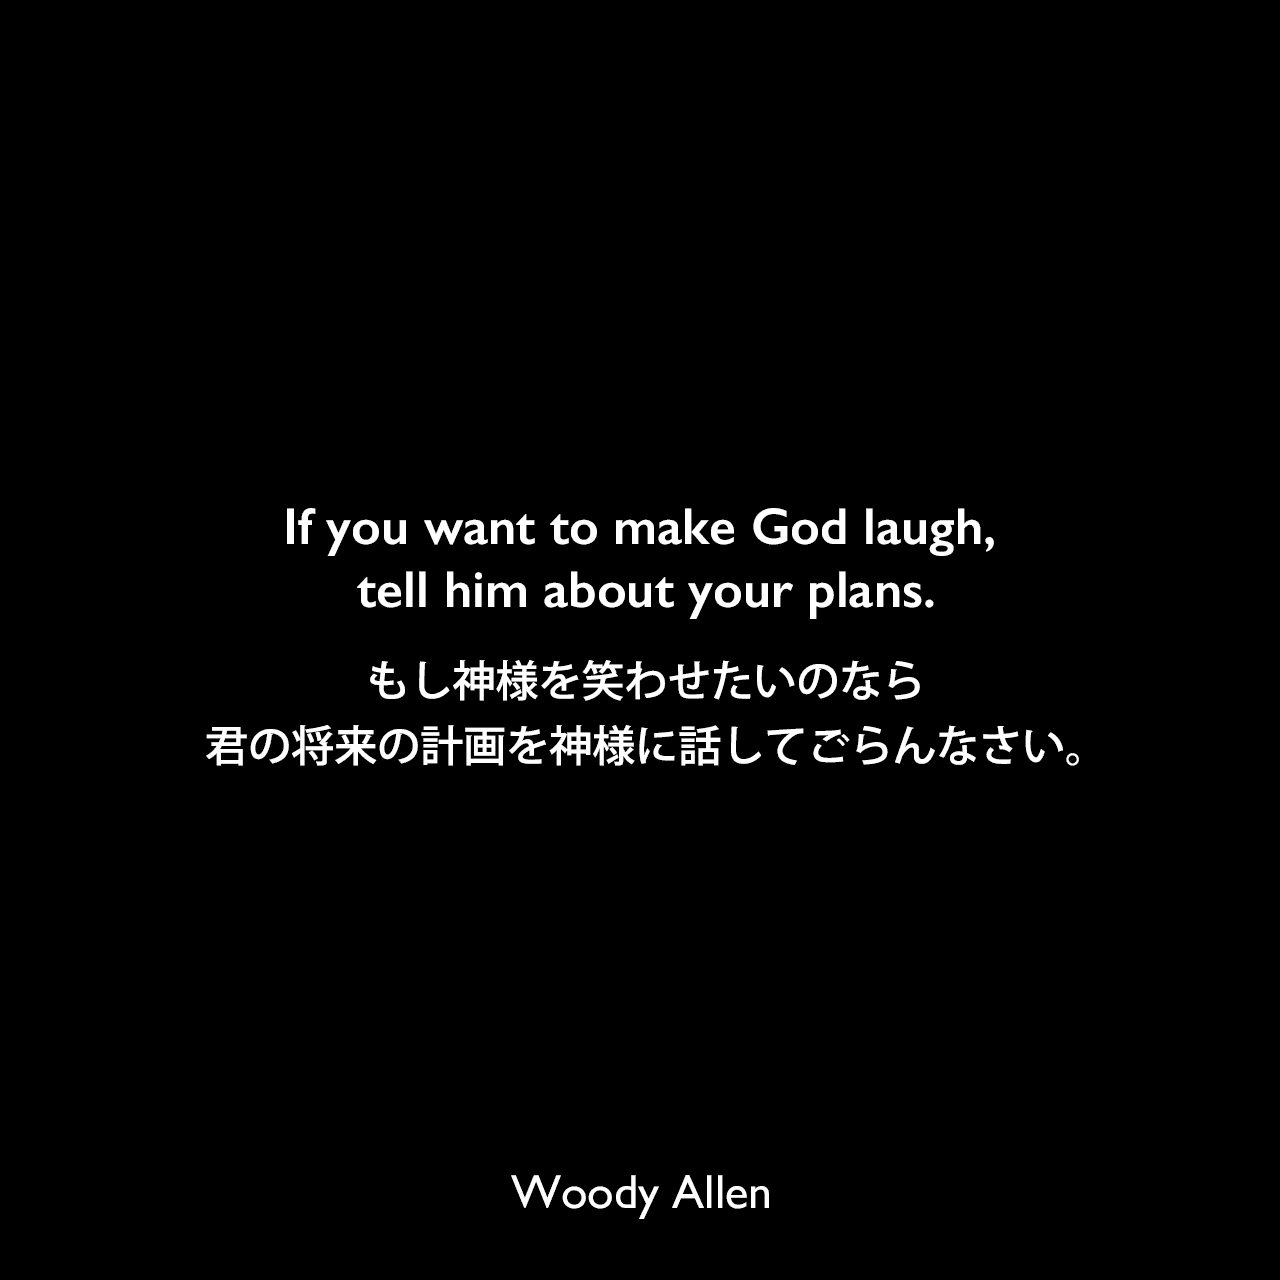 If you want to make God laugh, tell him about your plans.もし神様を笑わせたいのなら、君の将来の計画を神様に話してごらんなさい。Woody Allen